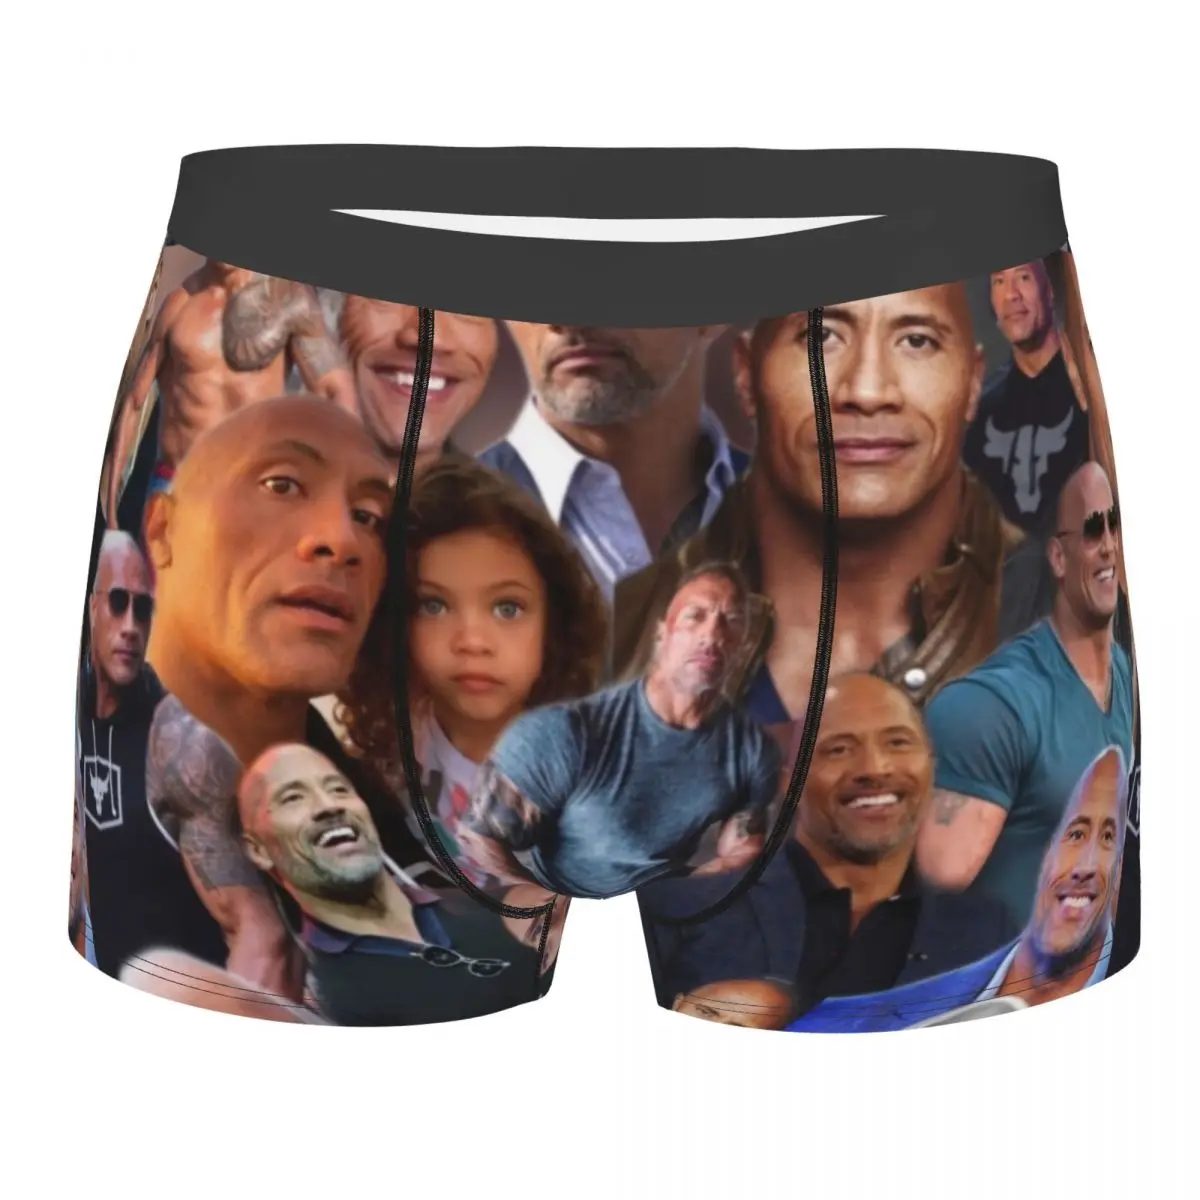 

Novelty Dwayne The Rock Johnson Collage Boxers Shorts Panties Male Underpants Stretch Briefs Underwear